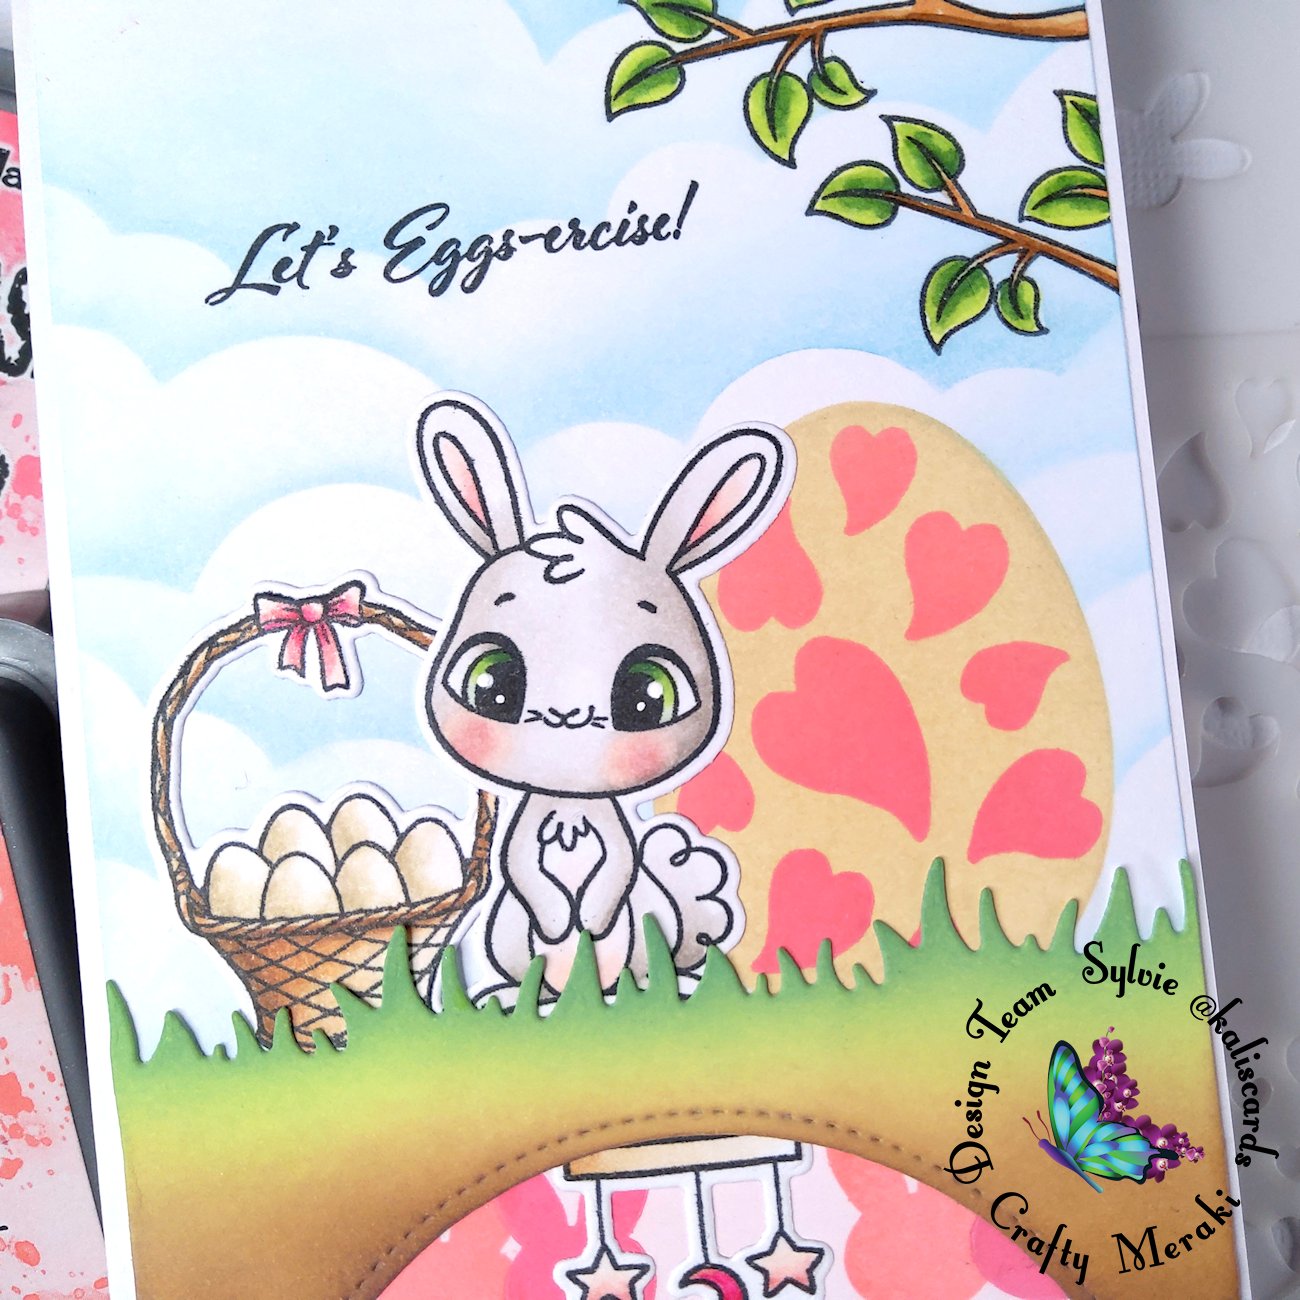 Let's eggs-ercise! and You're eggs-traordinary! by Sylvie @kaliscards